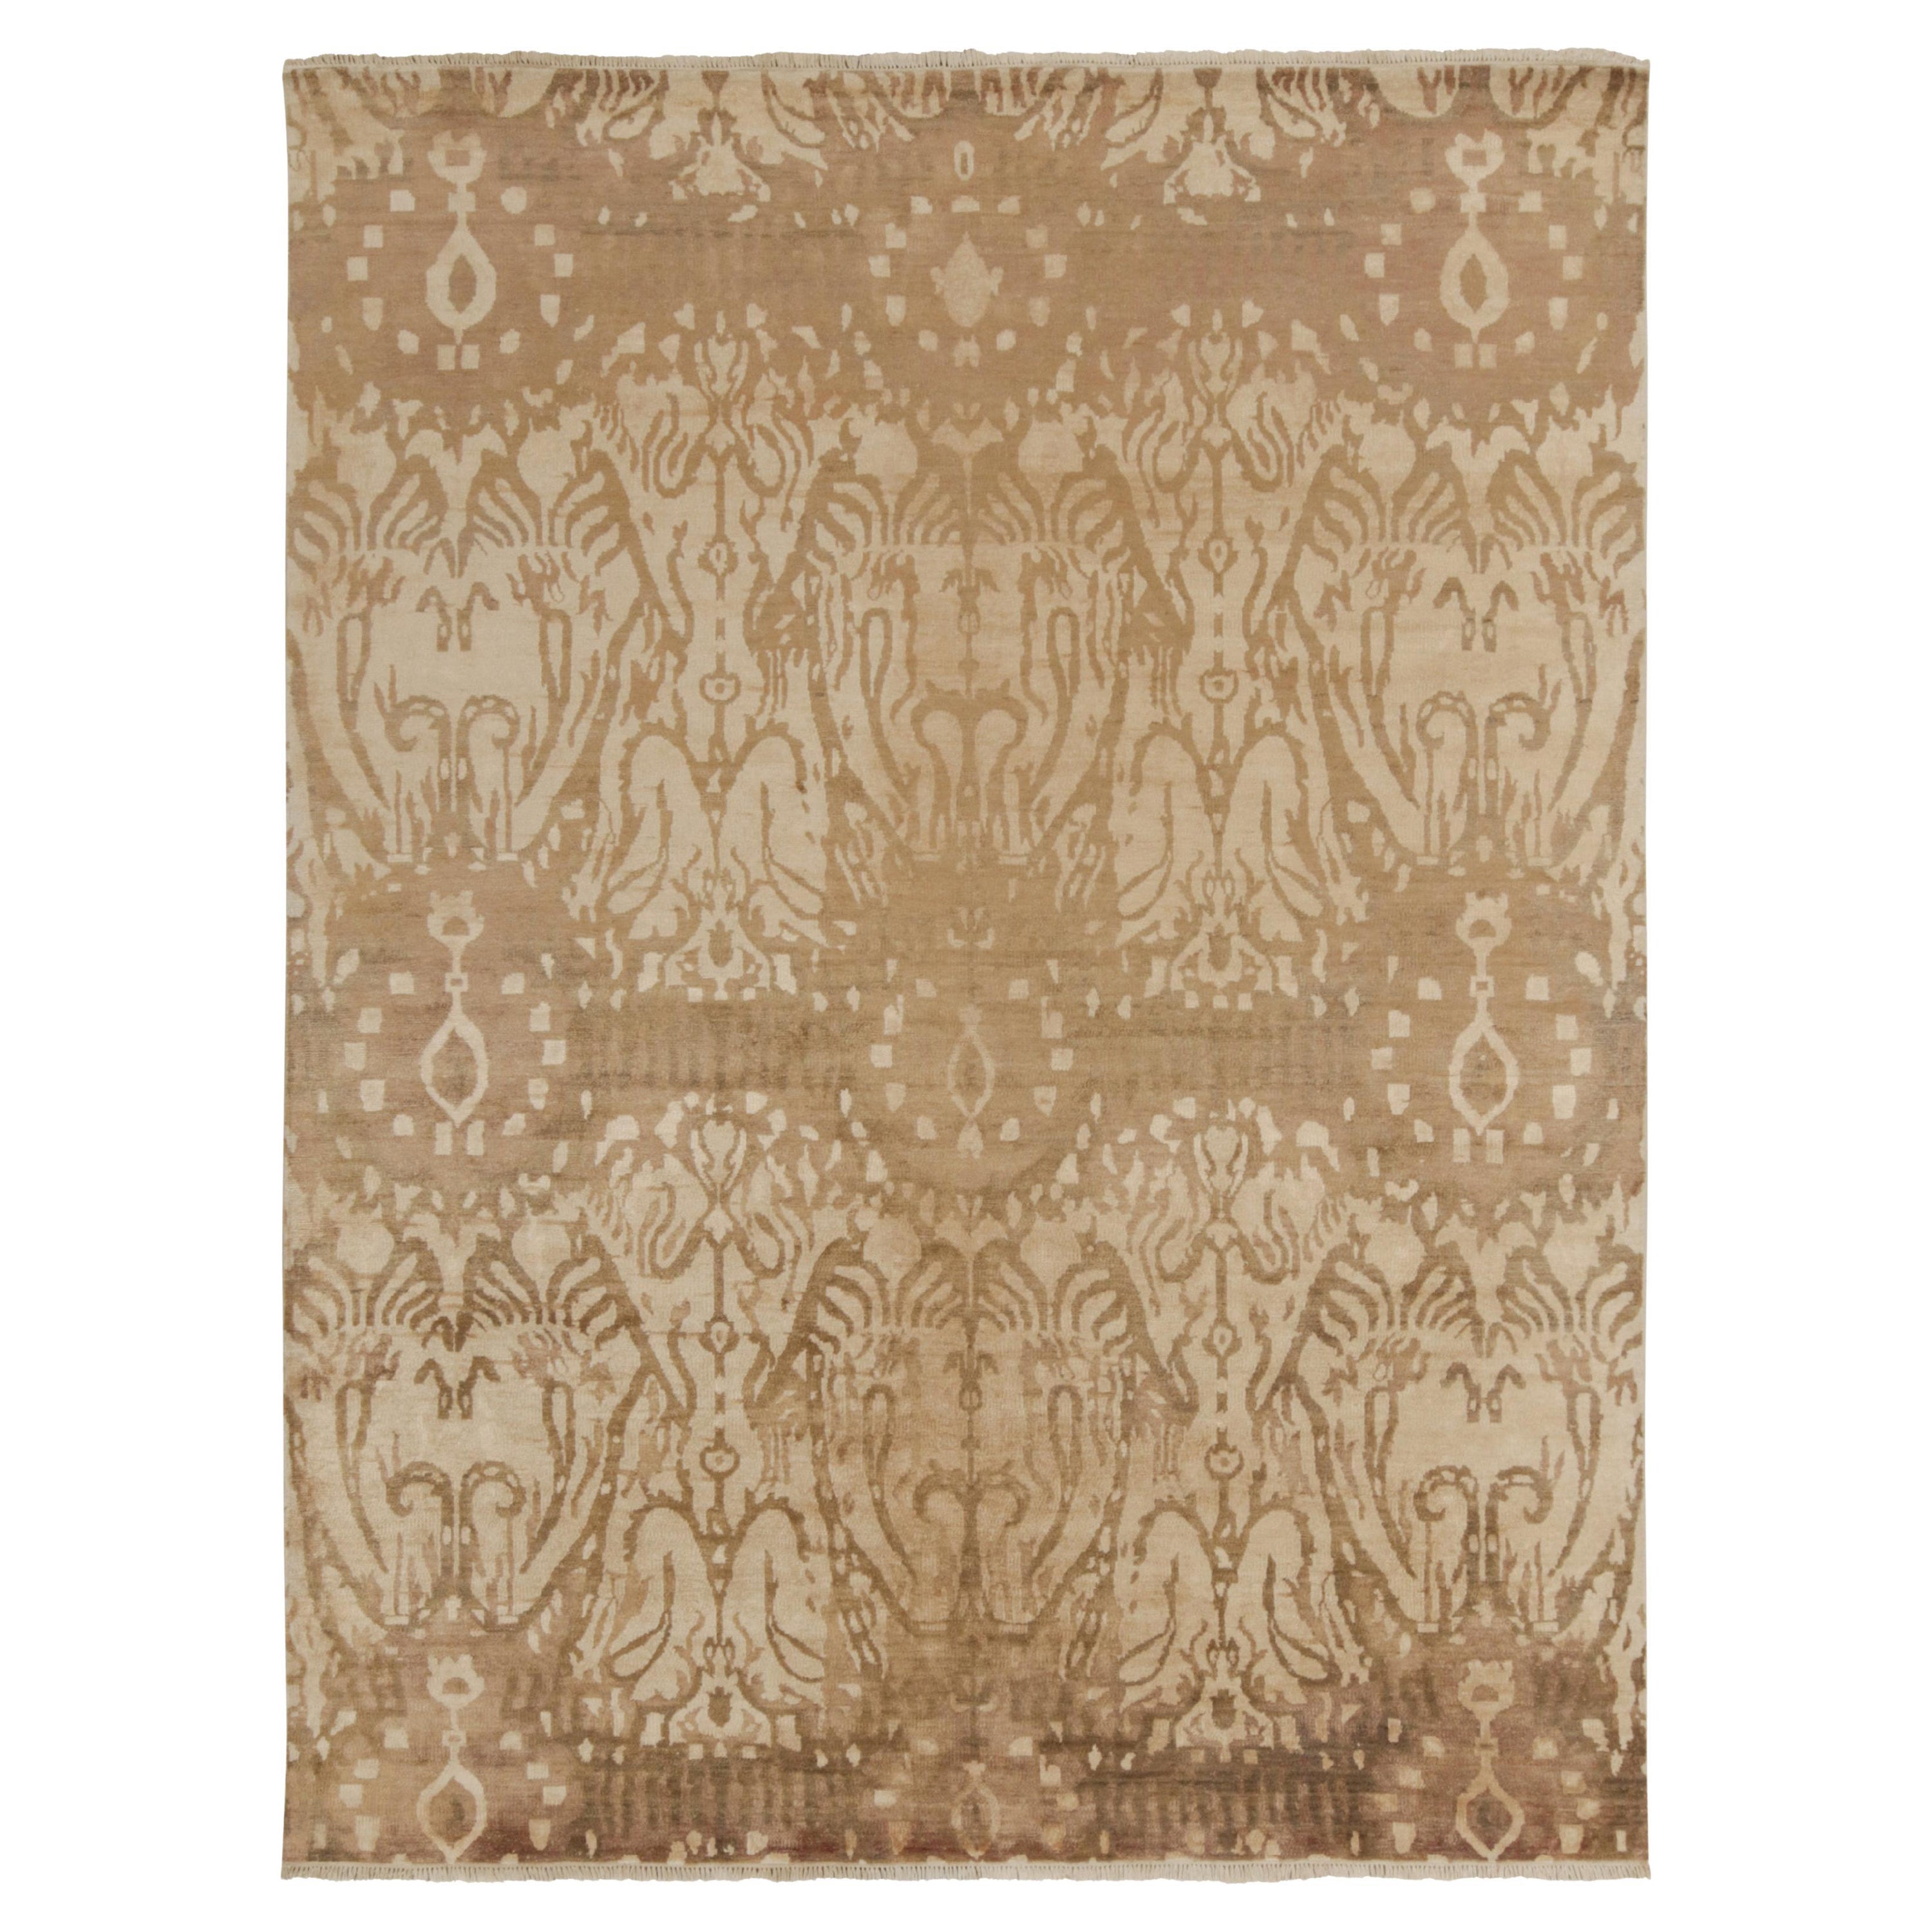 Rug & Kilim's Classic-Style Contemporary Teppich in Beige-Braun Ikats Muster